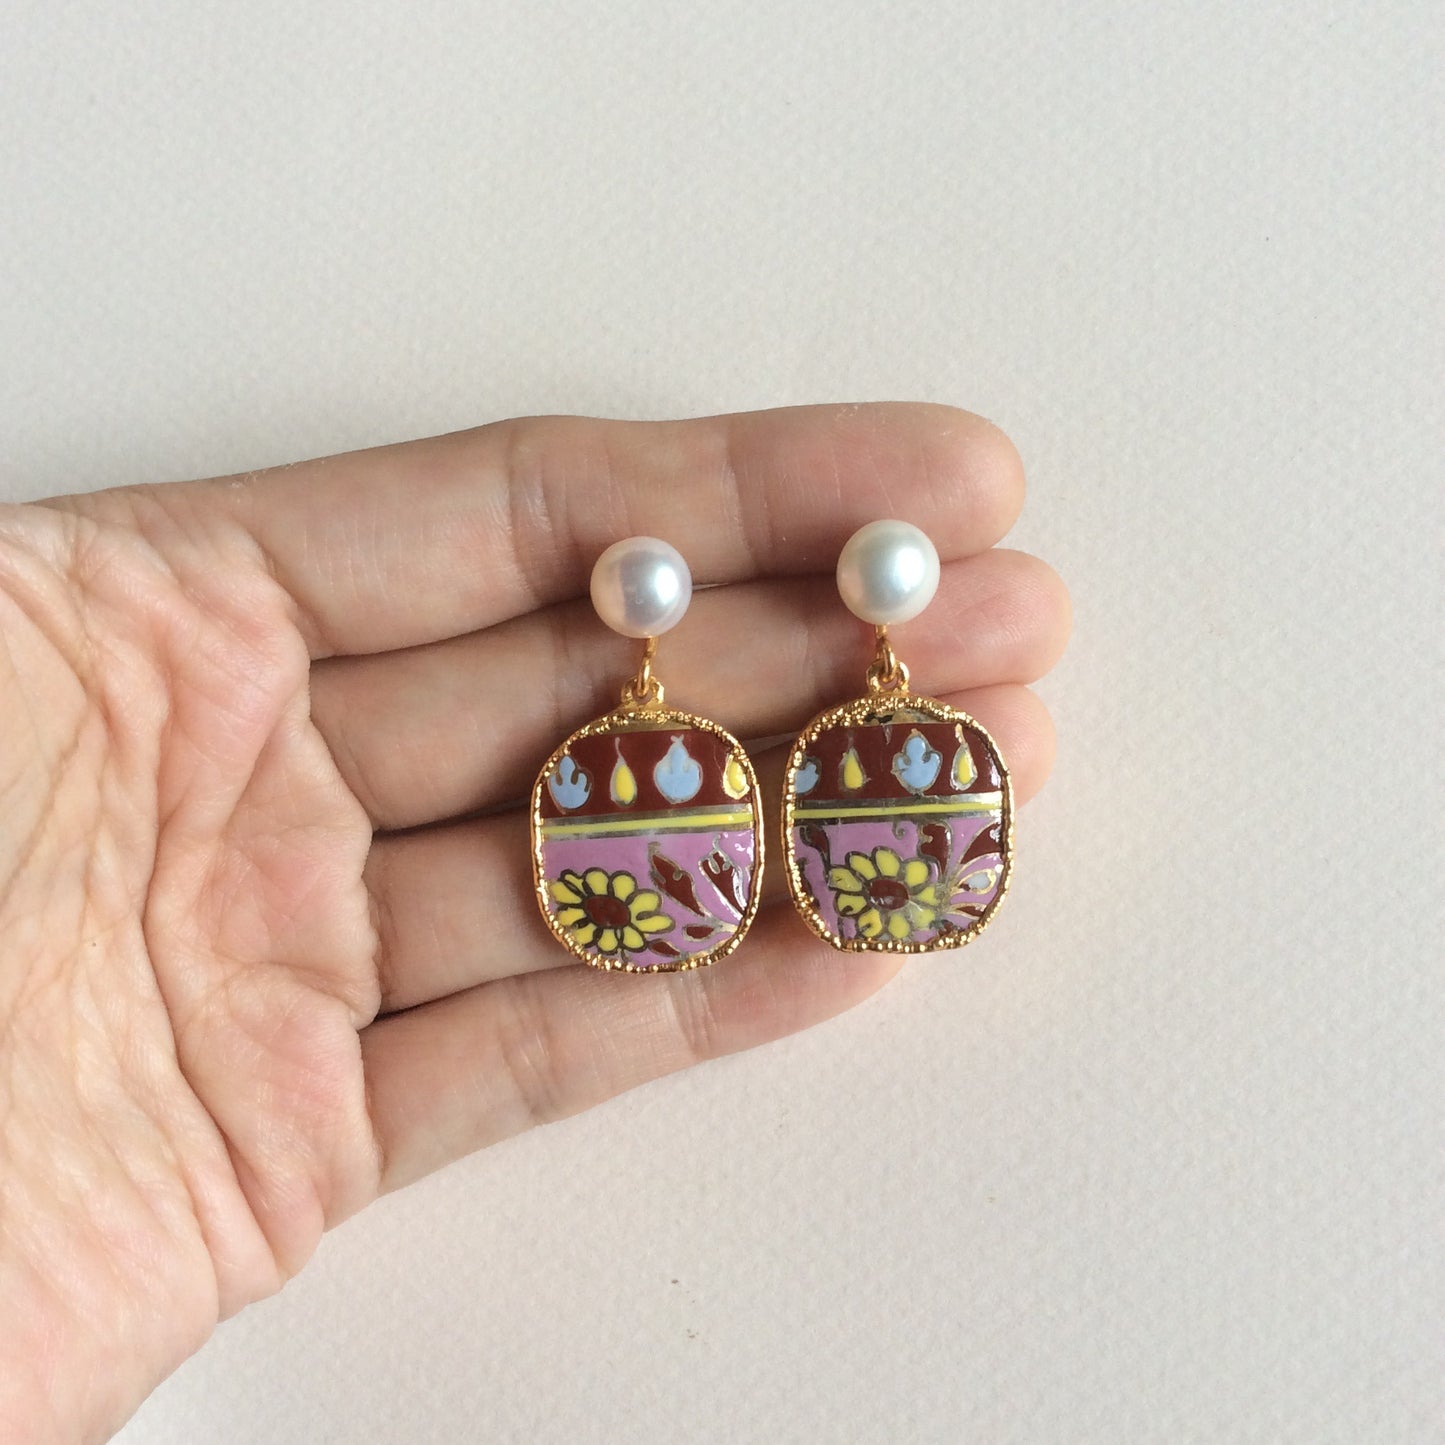 Pink batik porcelain earrings with round freshwater pearl studs